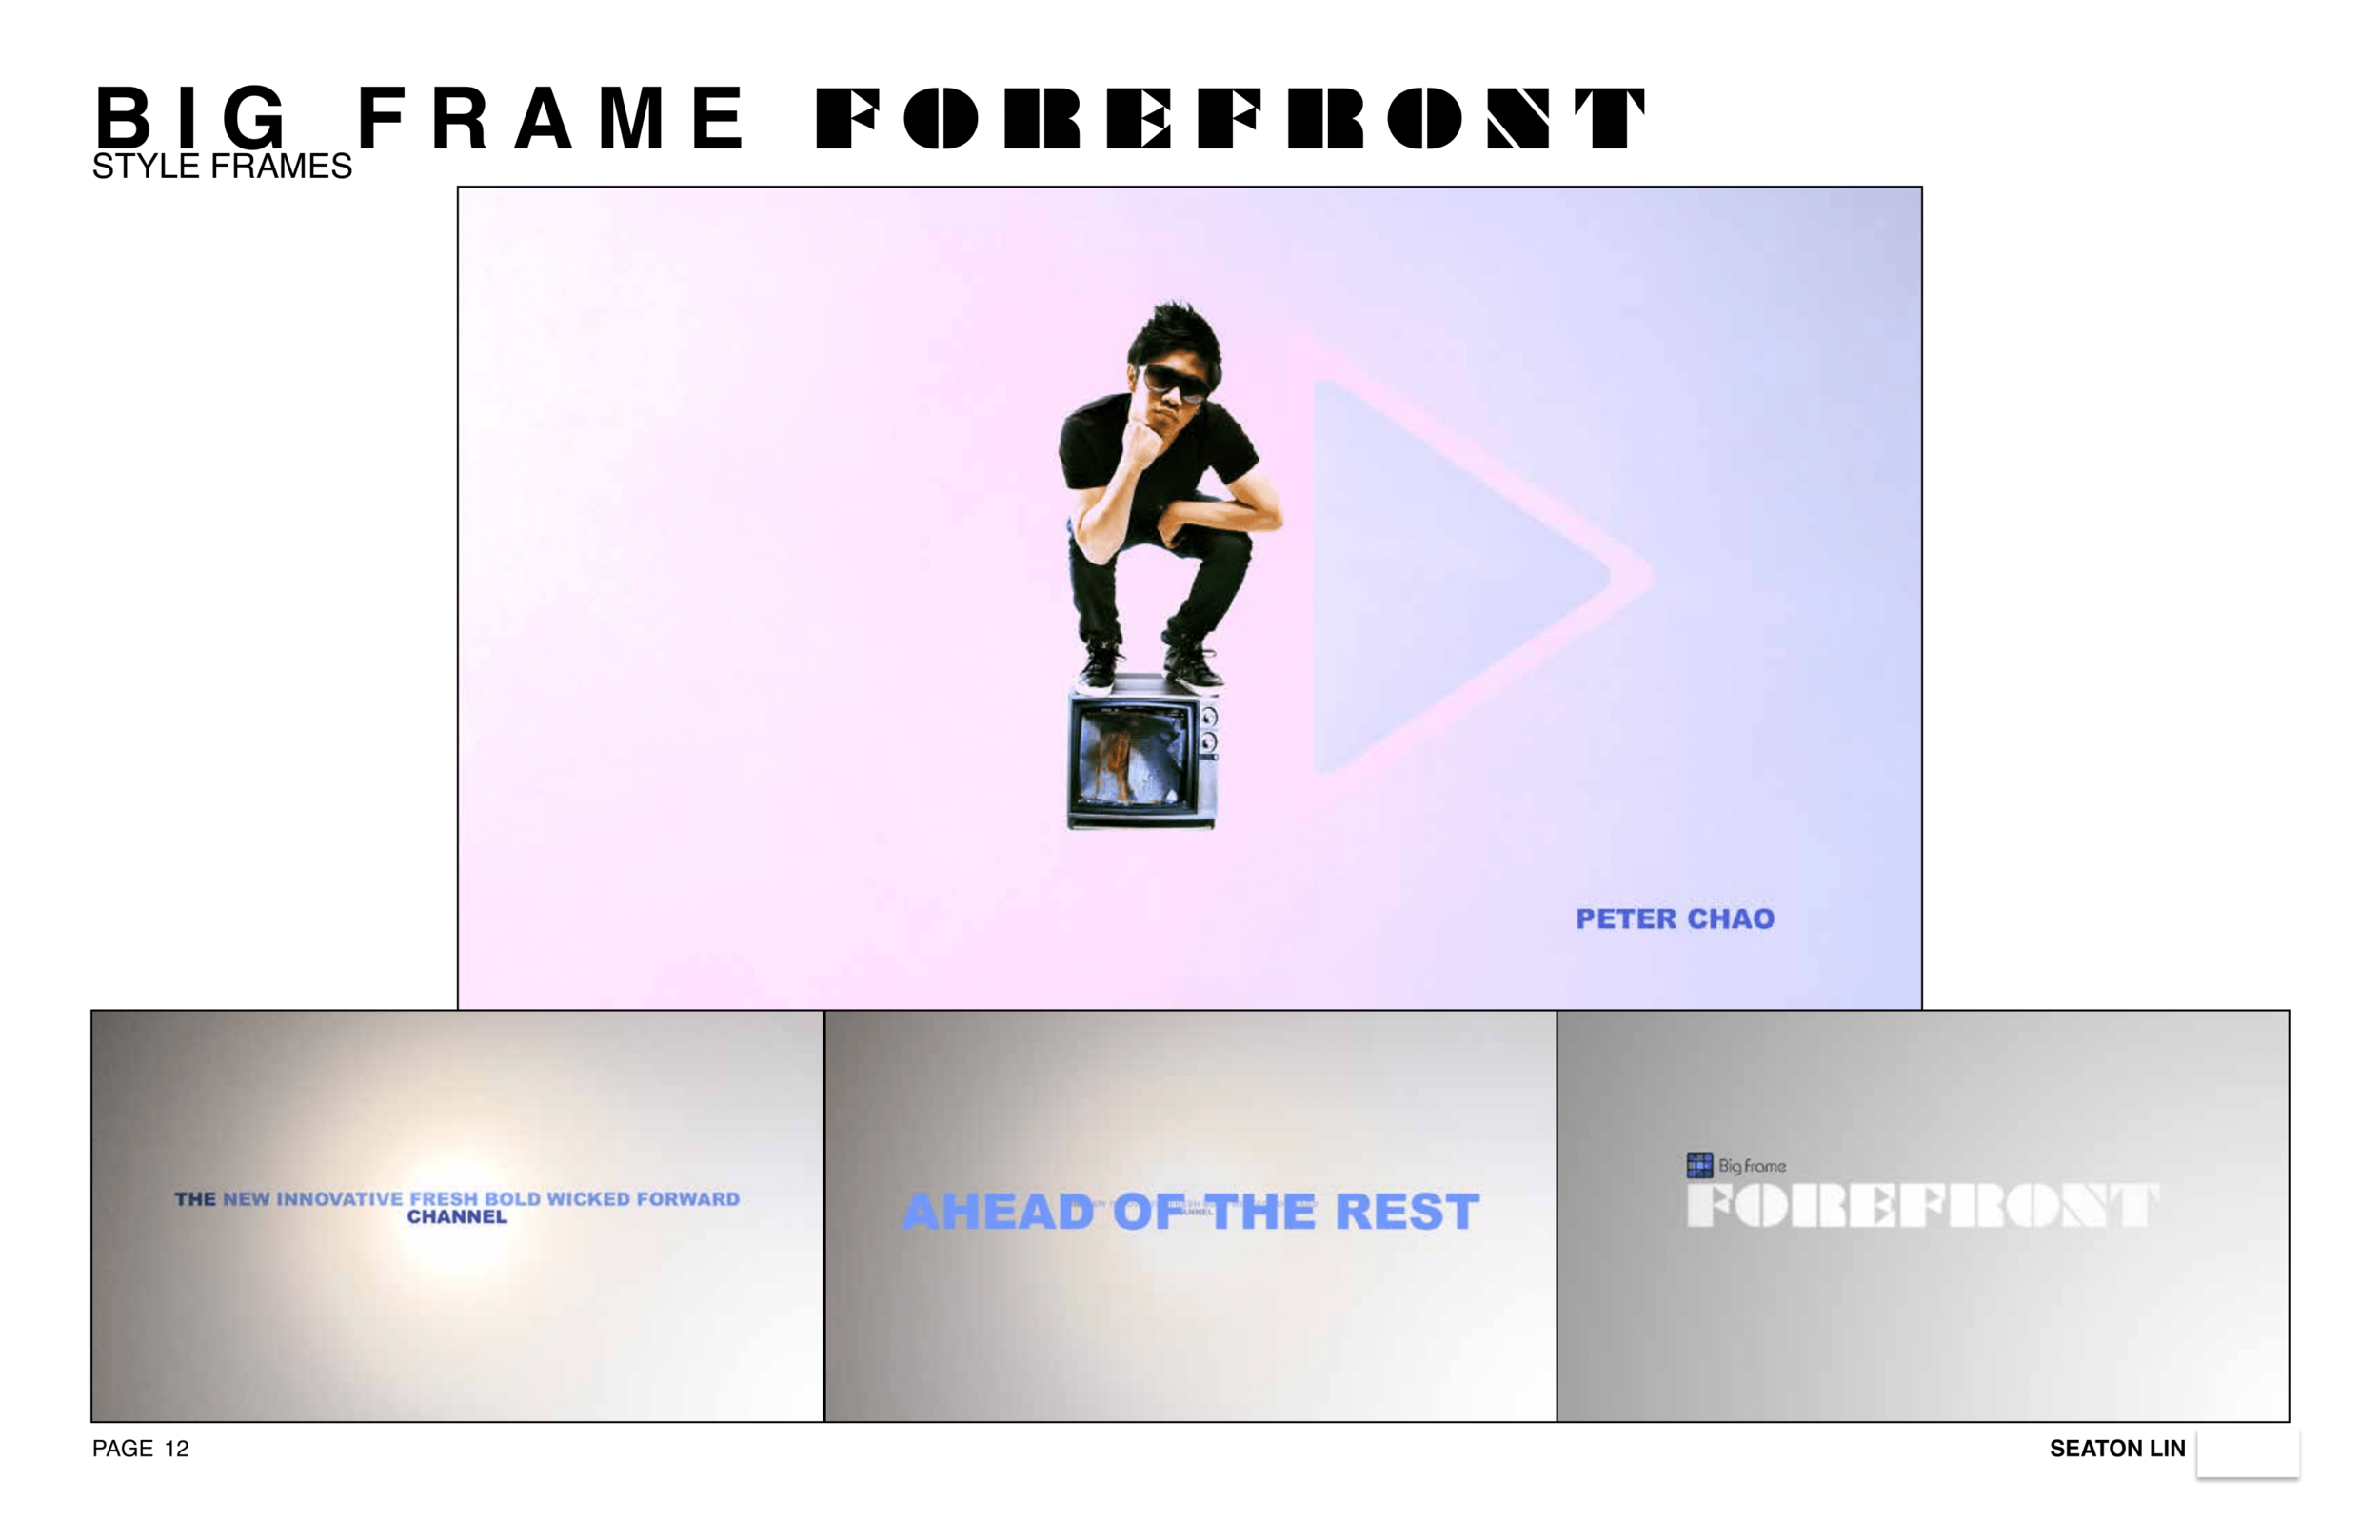 BigFrame_ForeFront_Treatment_SeatonLin-12.png